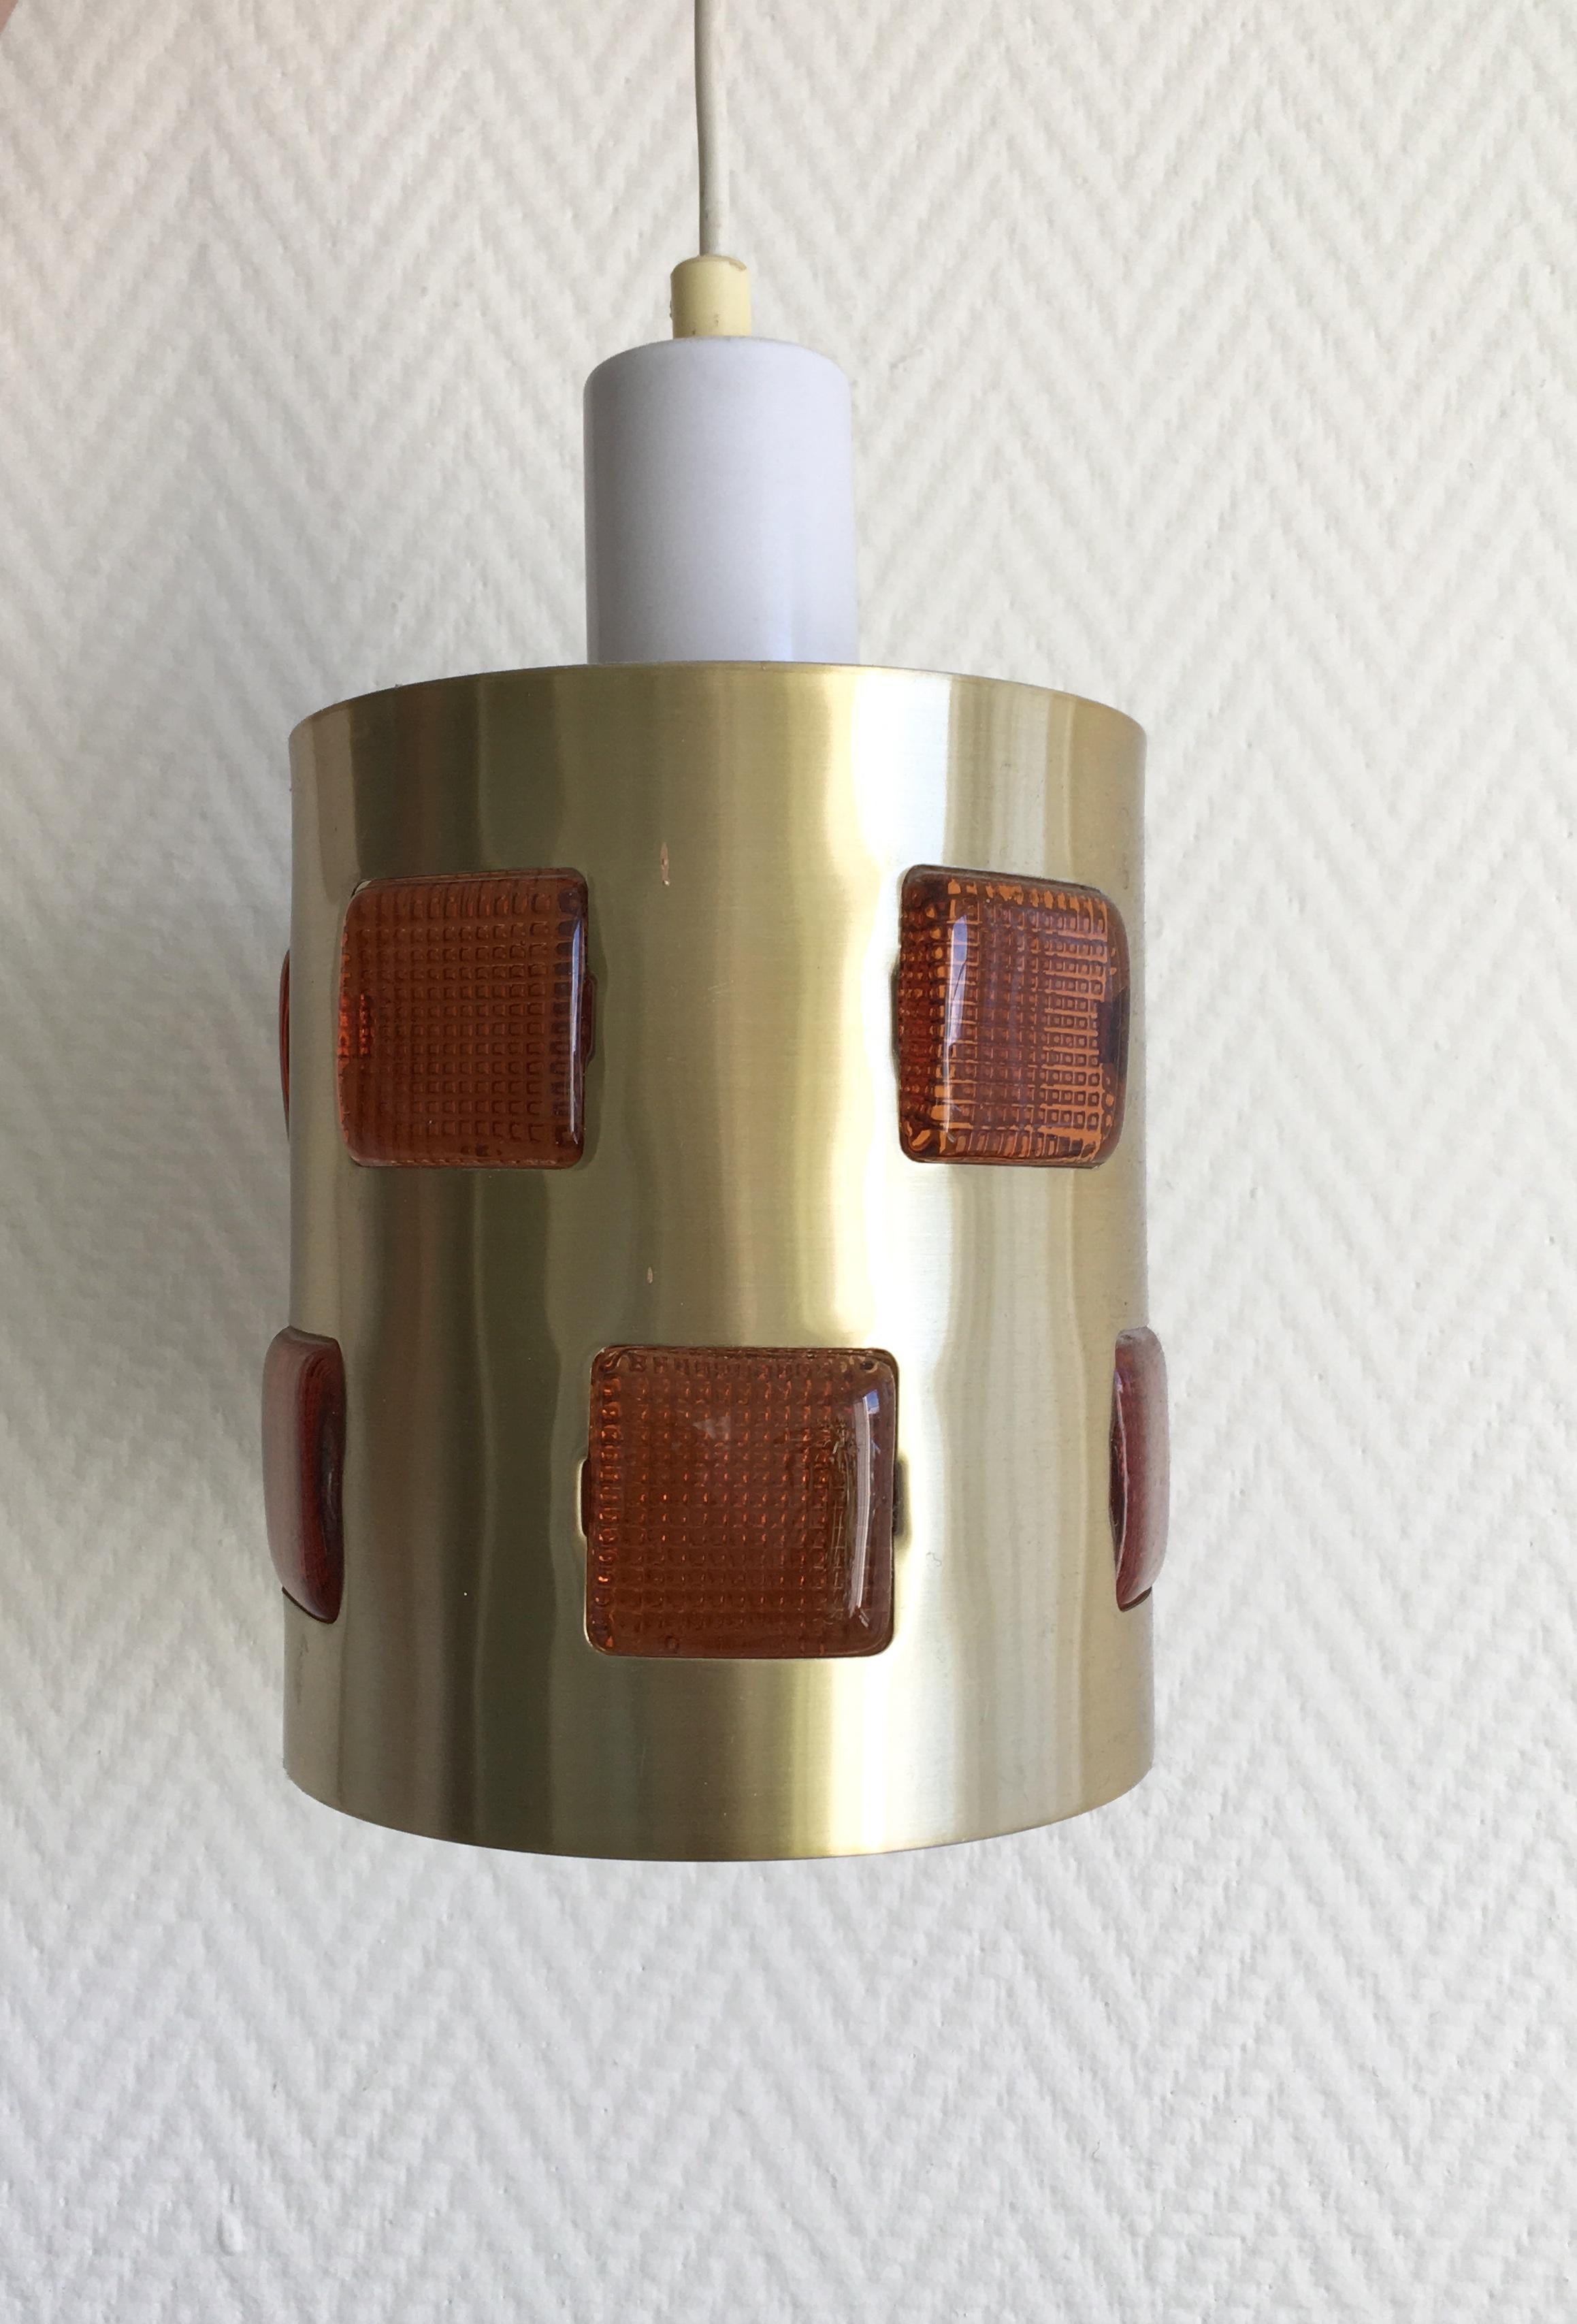 Small metal and glass lamp which was designed and manufactured in Sweden, 1960s. The lamp remains in good condition and features a sticker 'Made in Sweden'. Normal signs of age and use (some small scratches and minor dents). Rare piece.